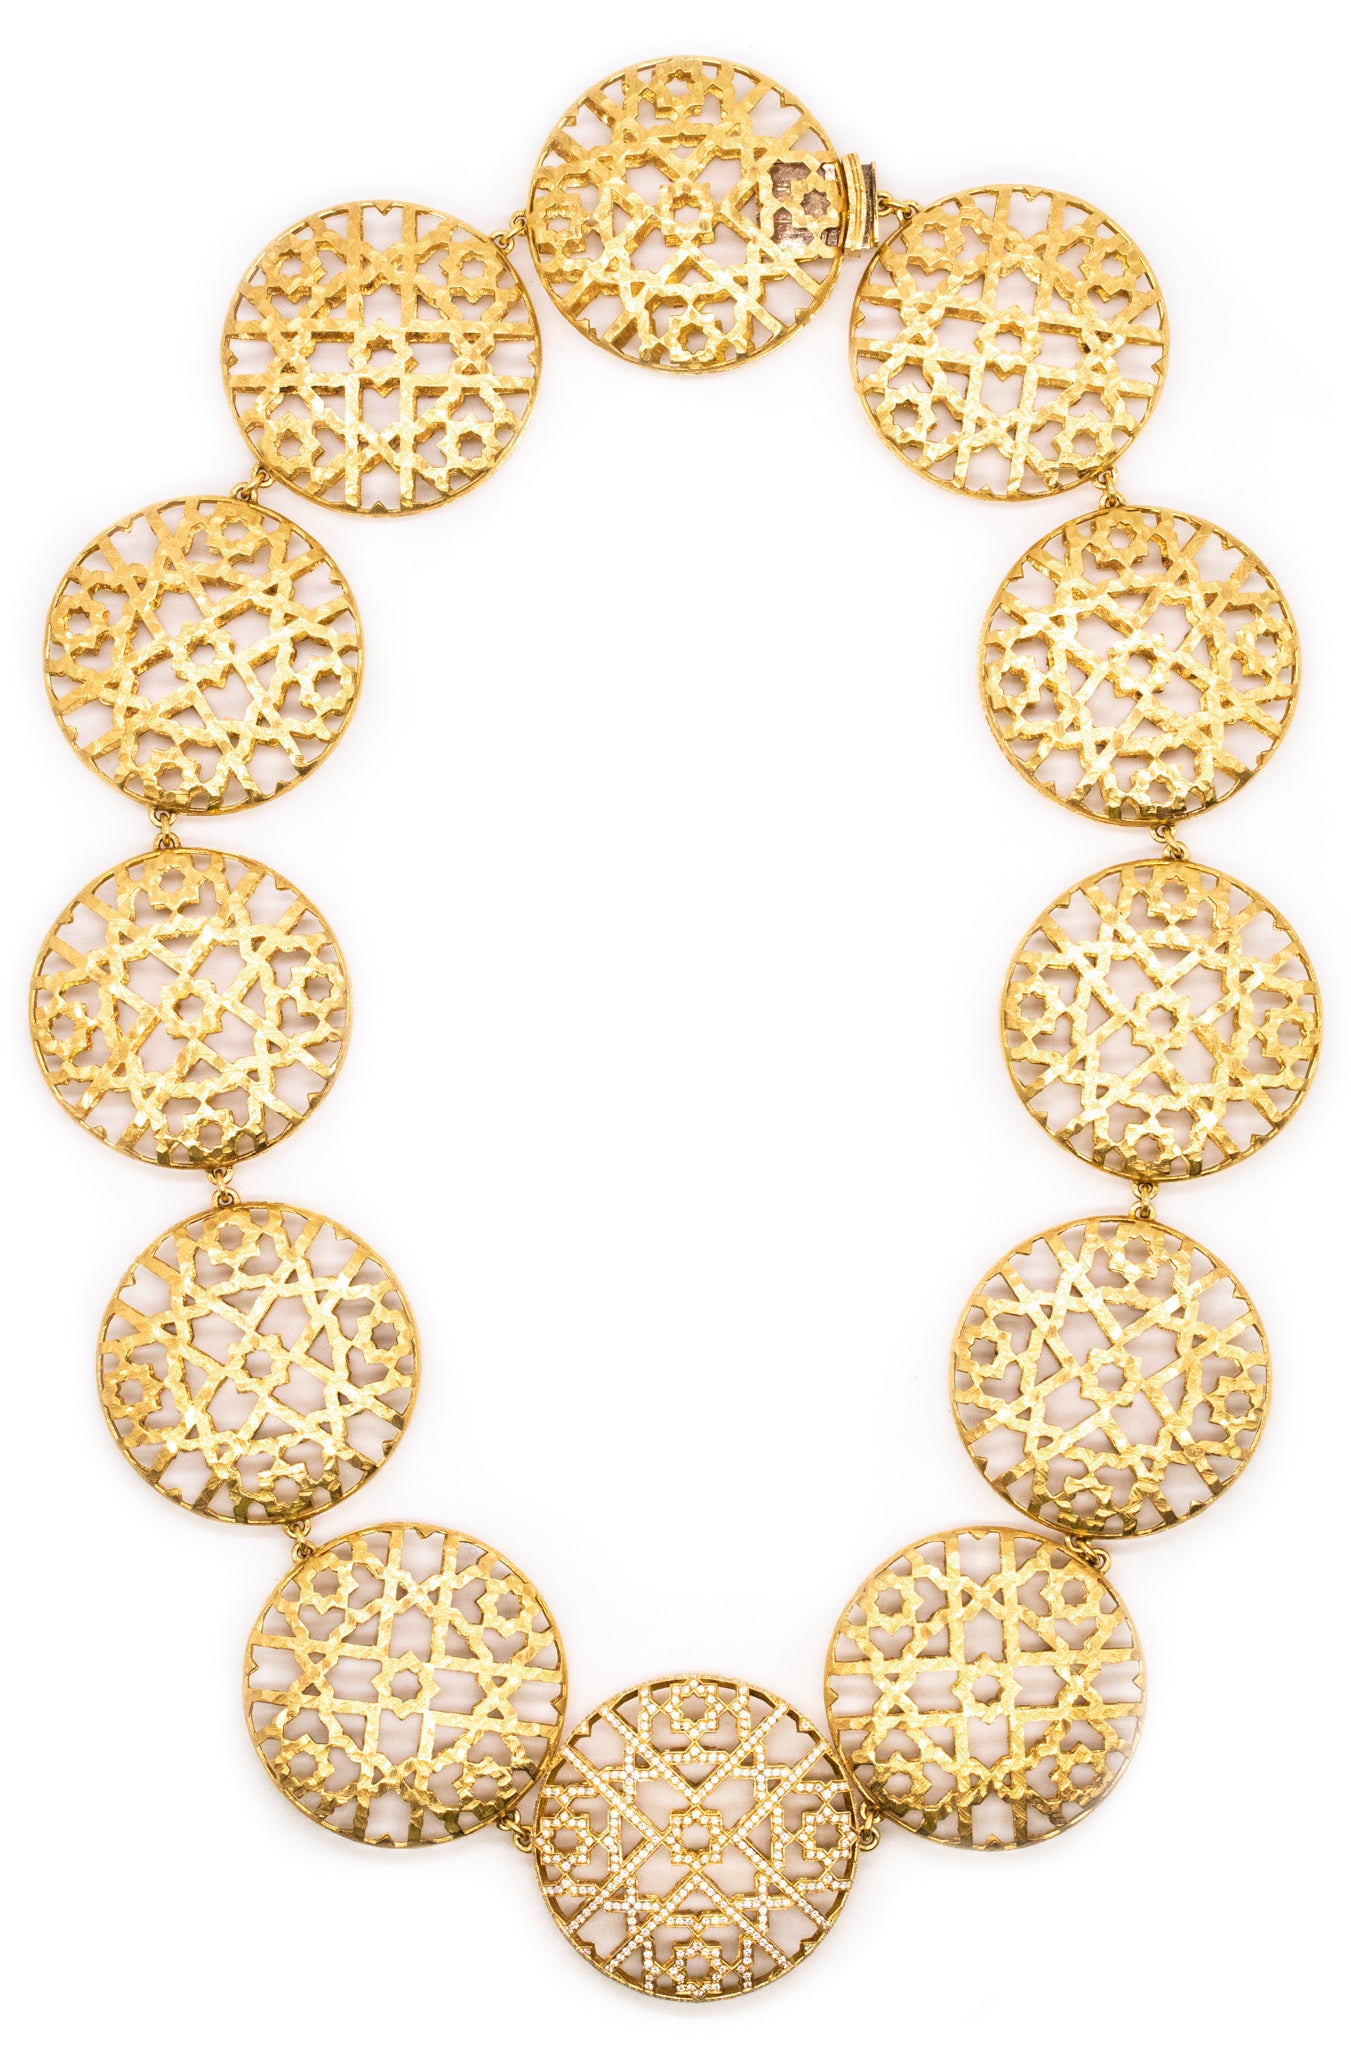 TIFFANY & CO. 1980 PALOMA PICASSO 18 KT MARRAKESH NECKLACE WITH 4.97 Ctw IN DIAMONDS